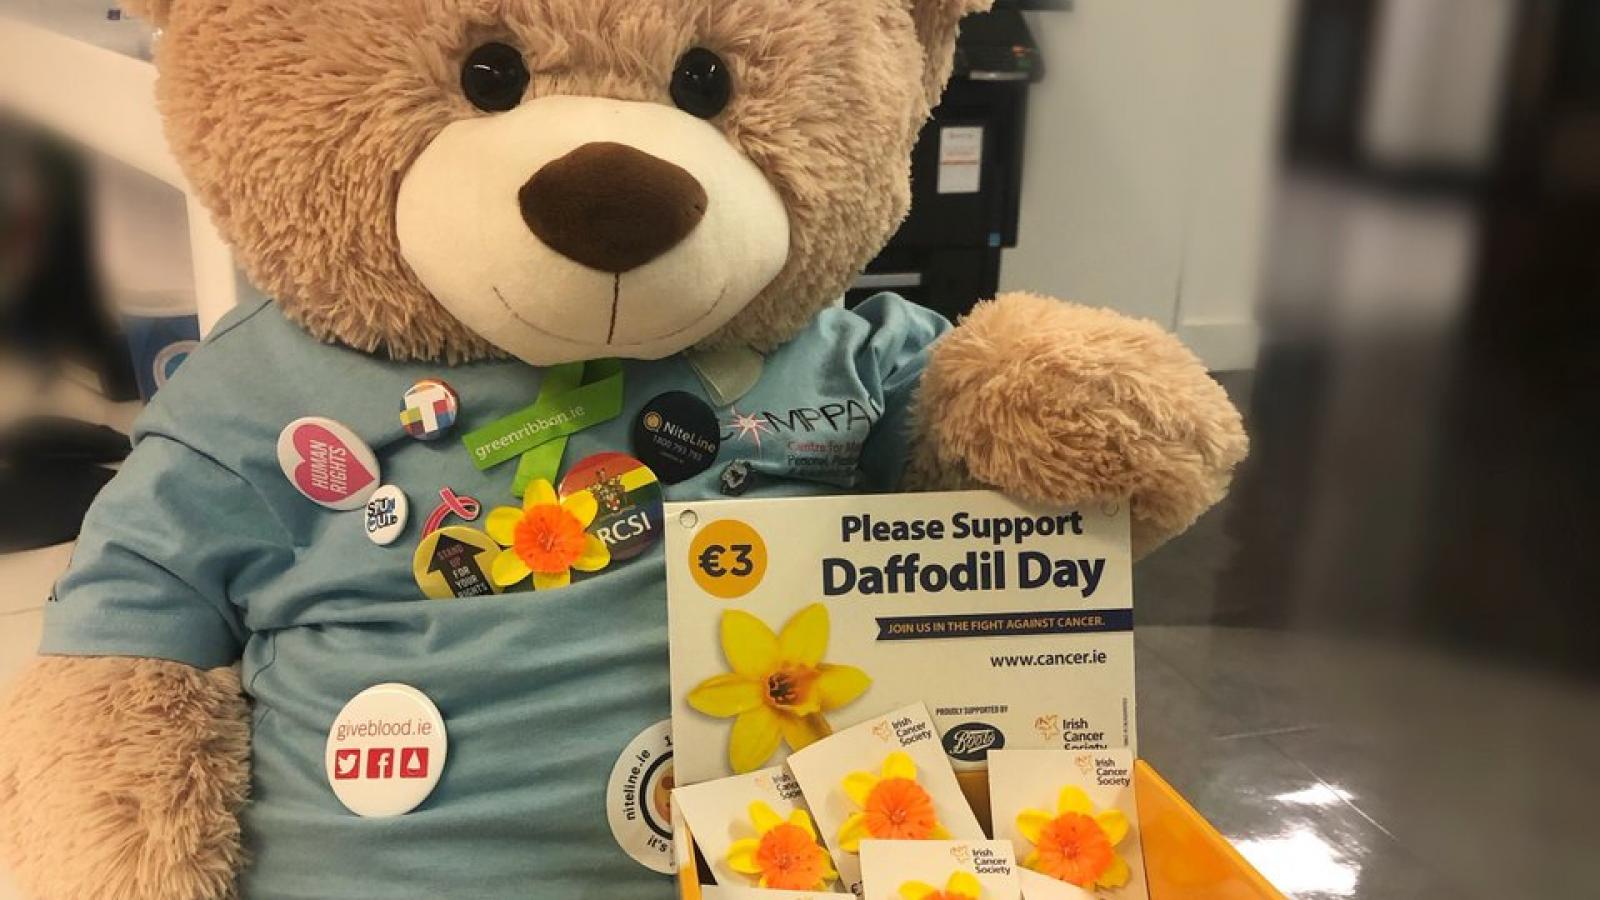 Daffodil Day teddy bear and collection box